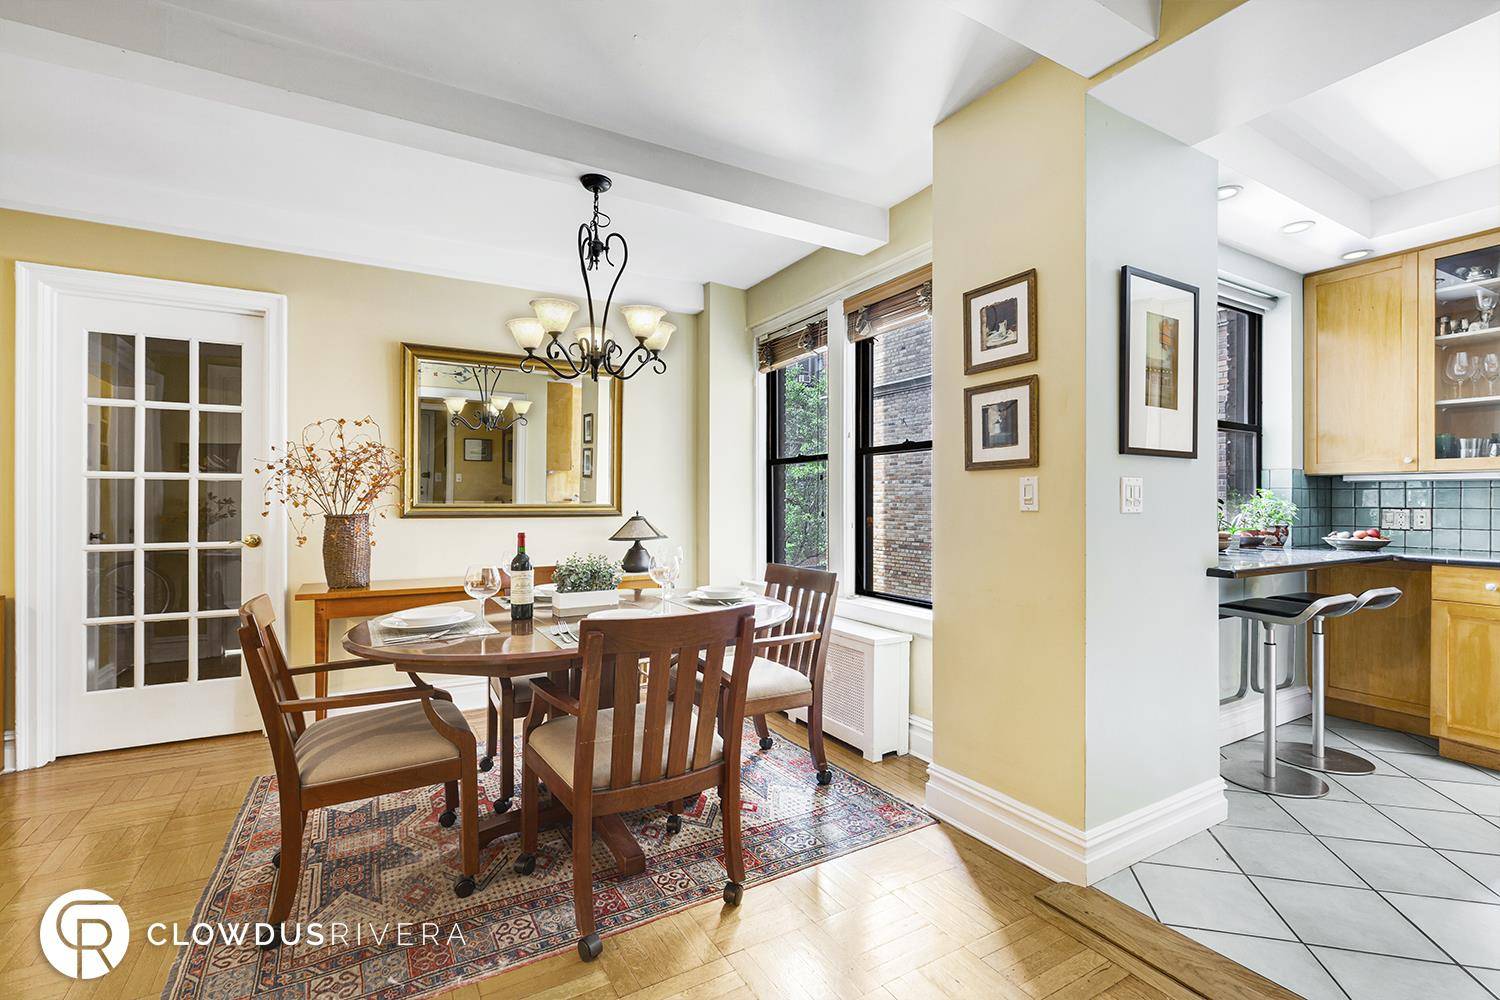 GRAND FOUR BEDROOM CLASSIC CANDELA HOMETHE WESTWIND 175 WEST 93RD STREET, APT 3HYOUR HOMESituated on the third floor of The Westwind one of the Upper West Side s most desirable, ...